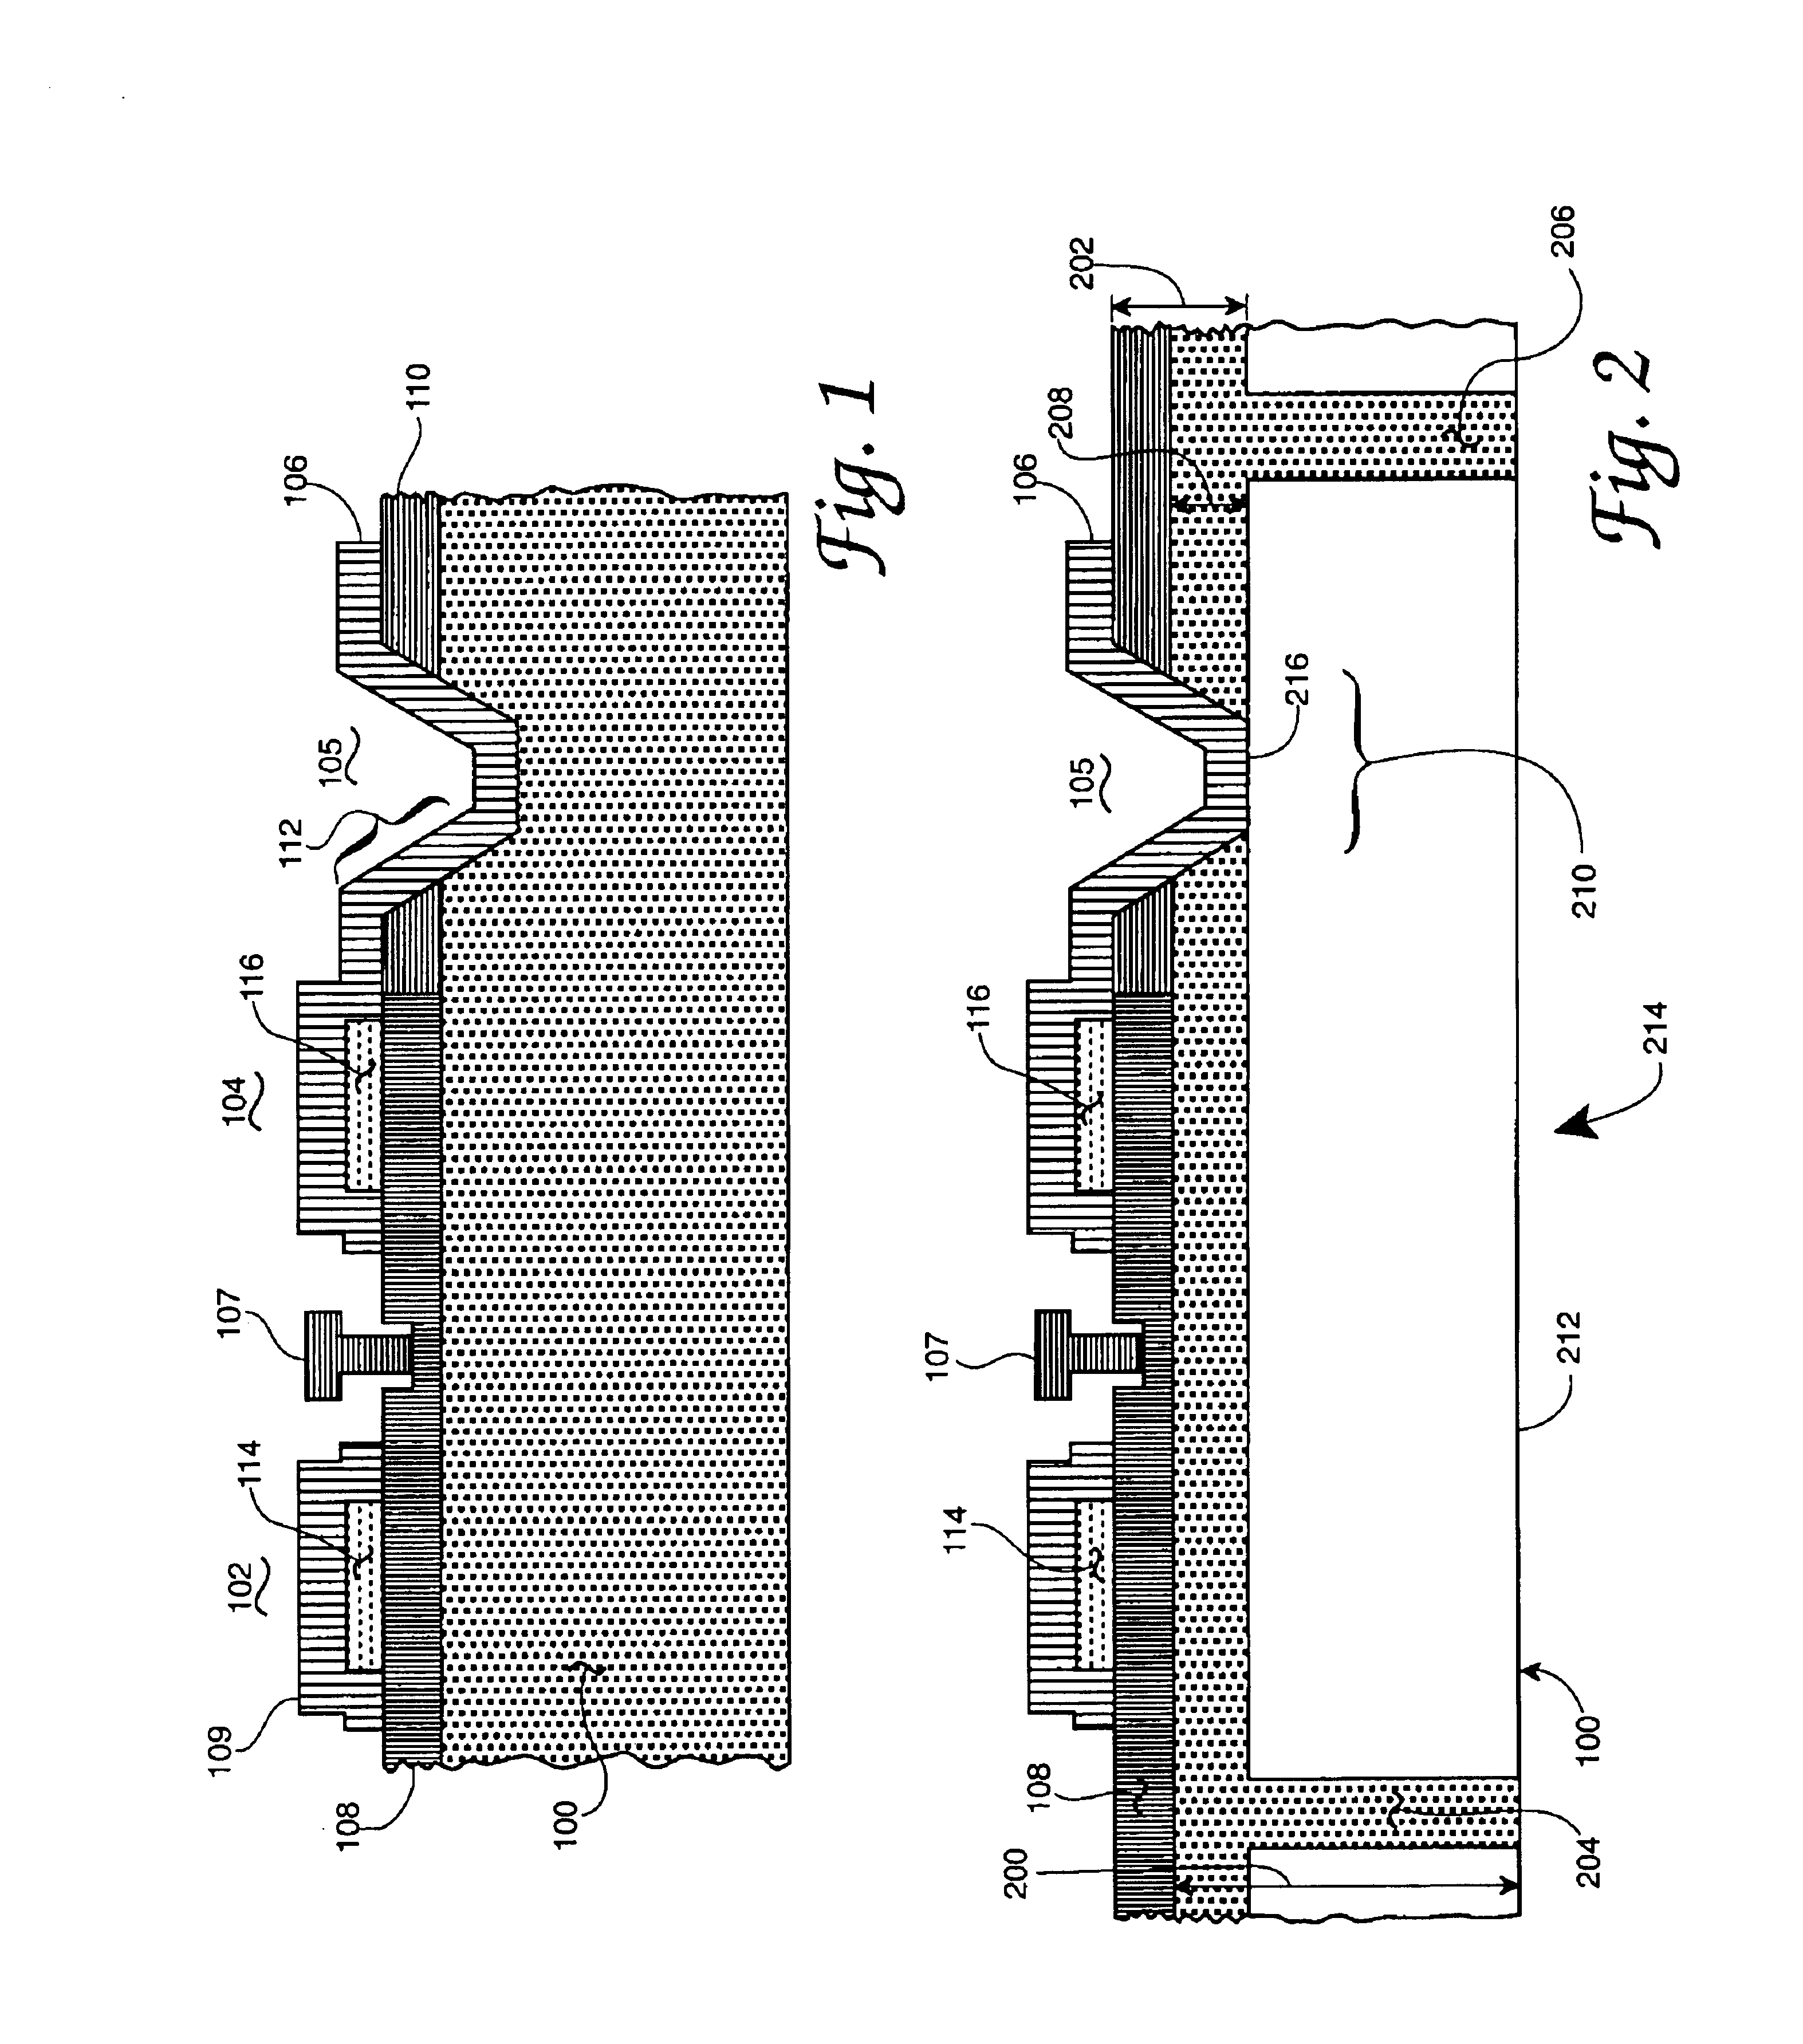 Stiffened backside fabrication for microwave radio frequency wafers